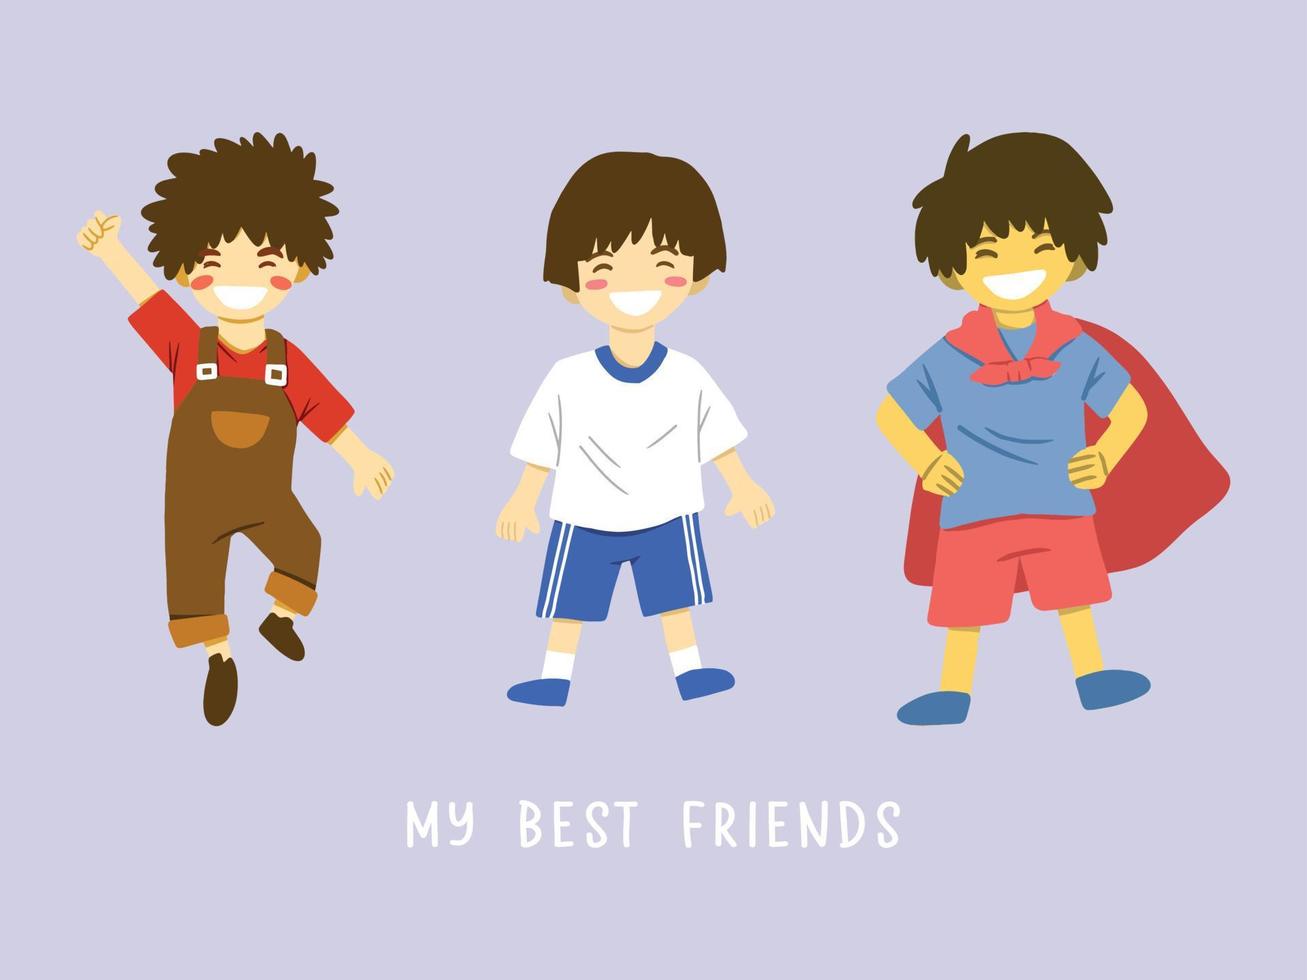 My best friends. Some kids playing together. Vector illustration in water color style